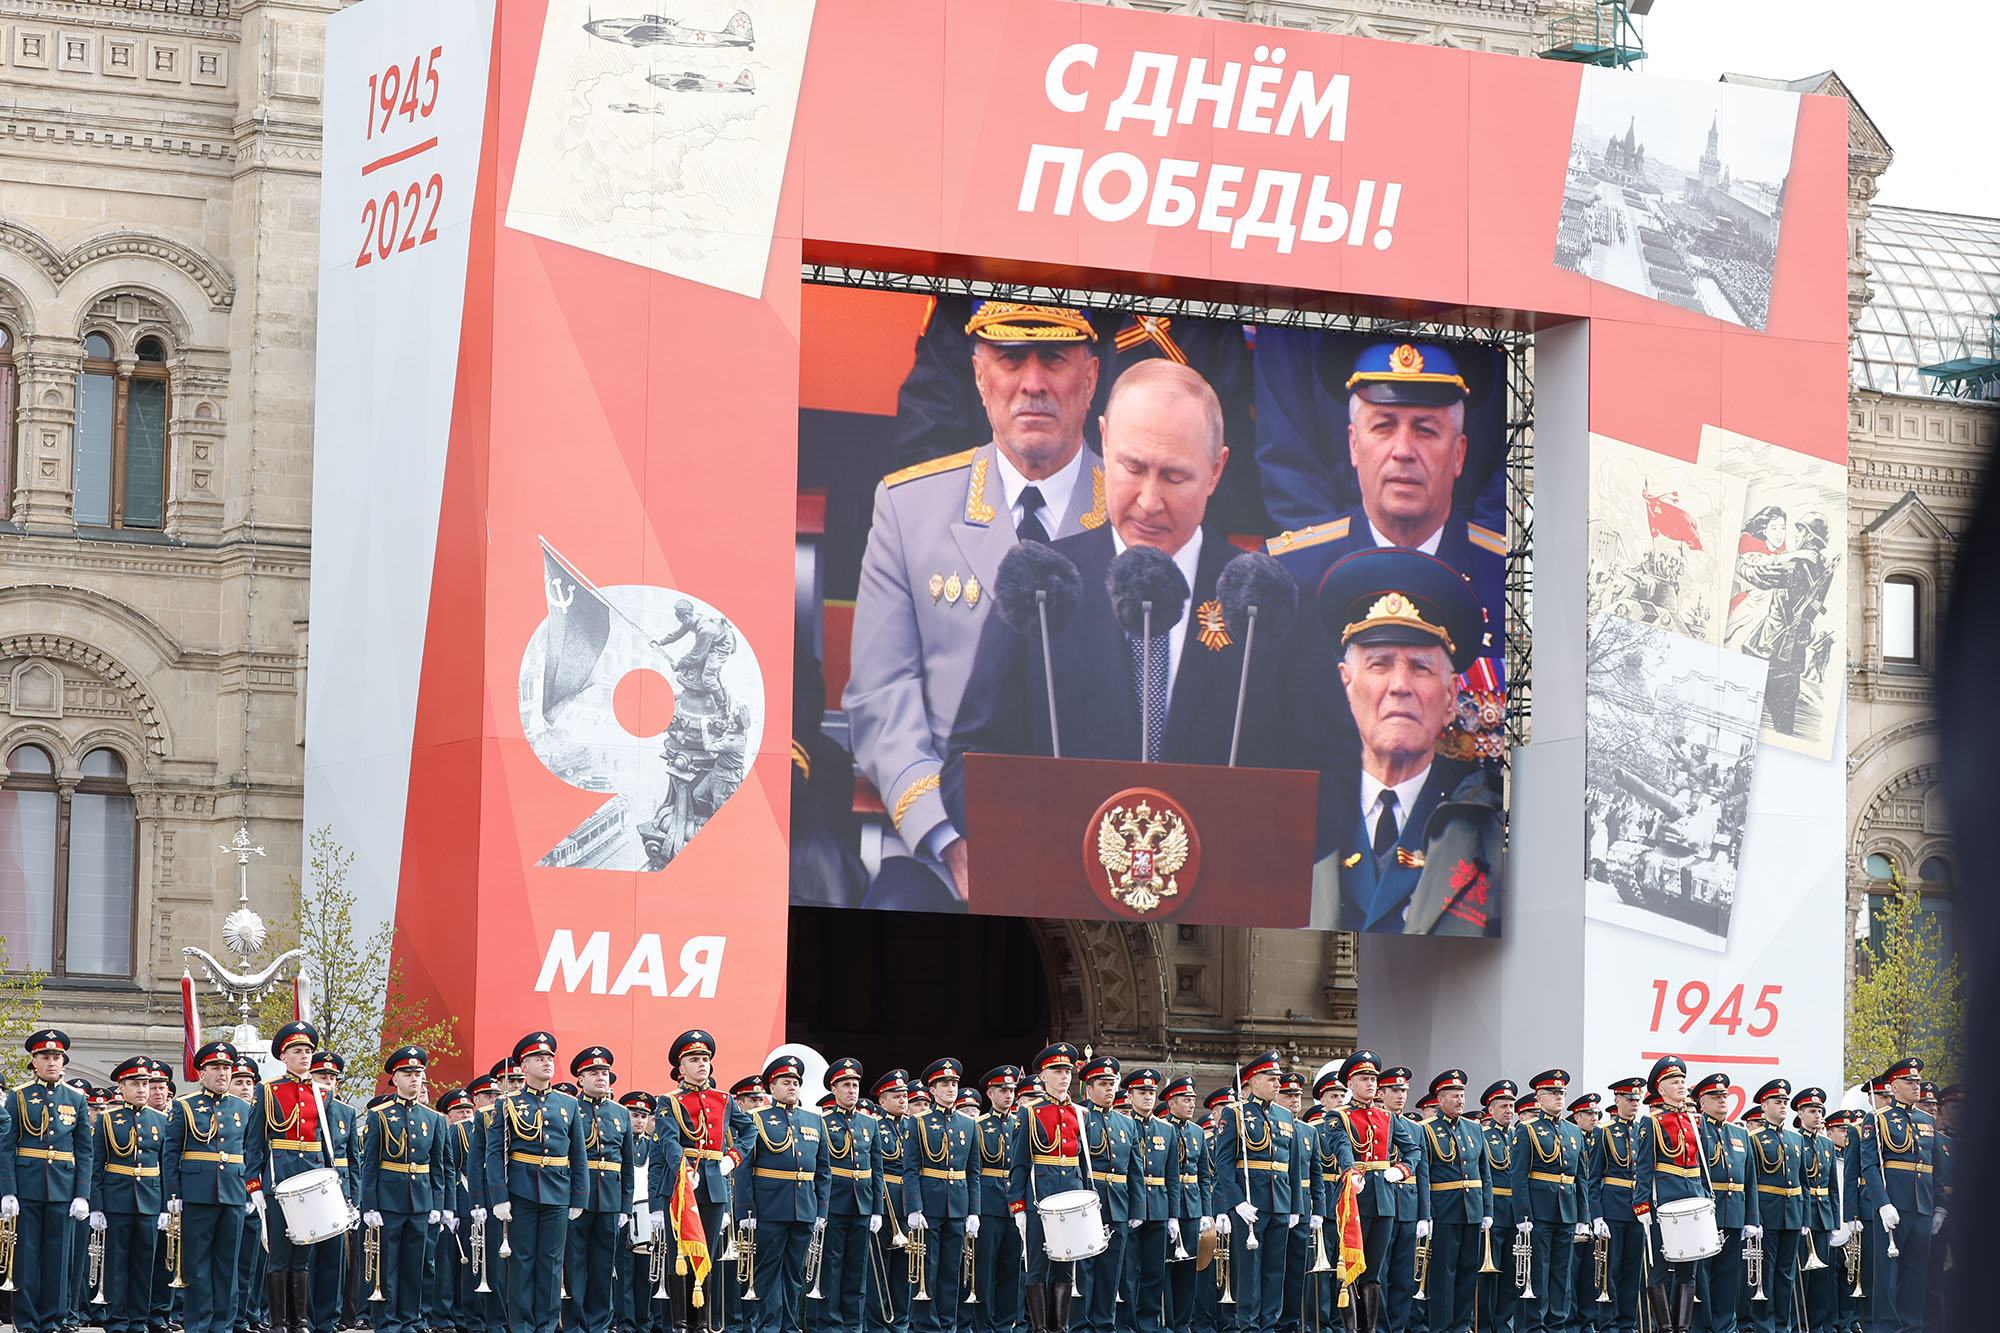 Russian President Vladimir Putin is seen on the screen as he delivers a speech during 77th anniversary of the Victory Day in Red Square in Moscow, Russia, on May 9.